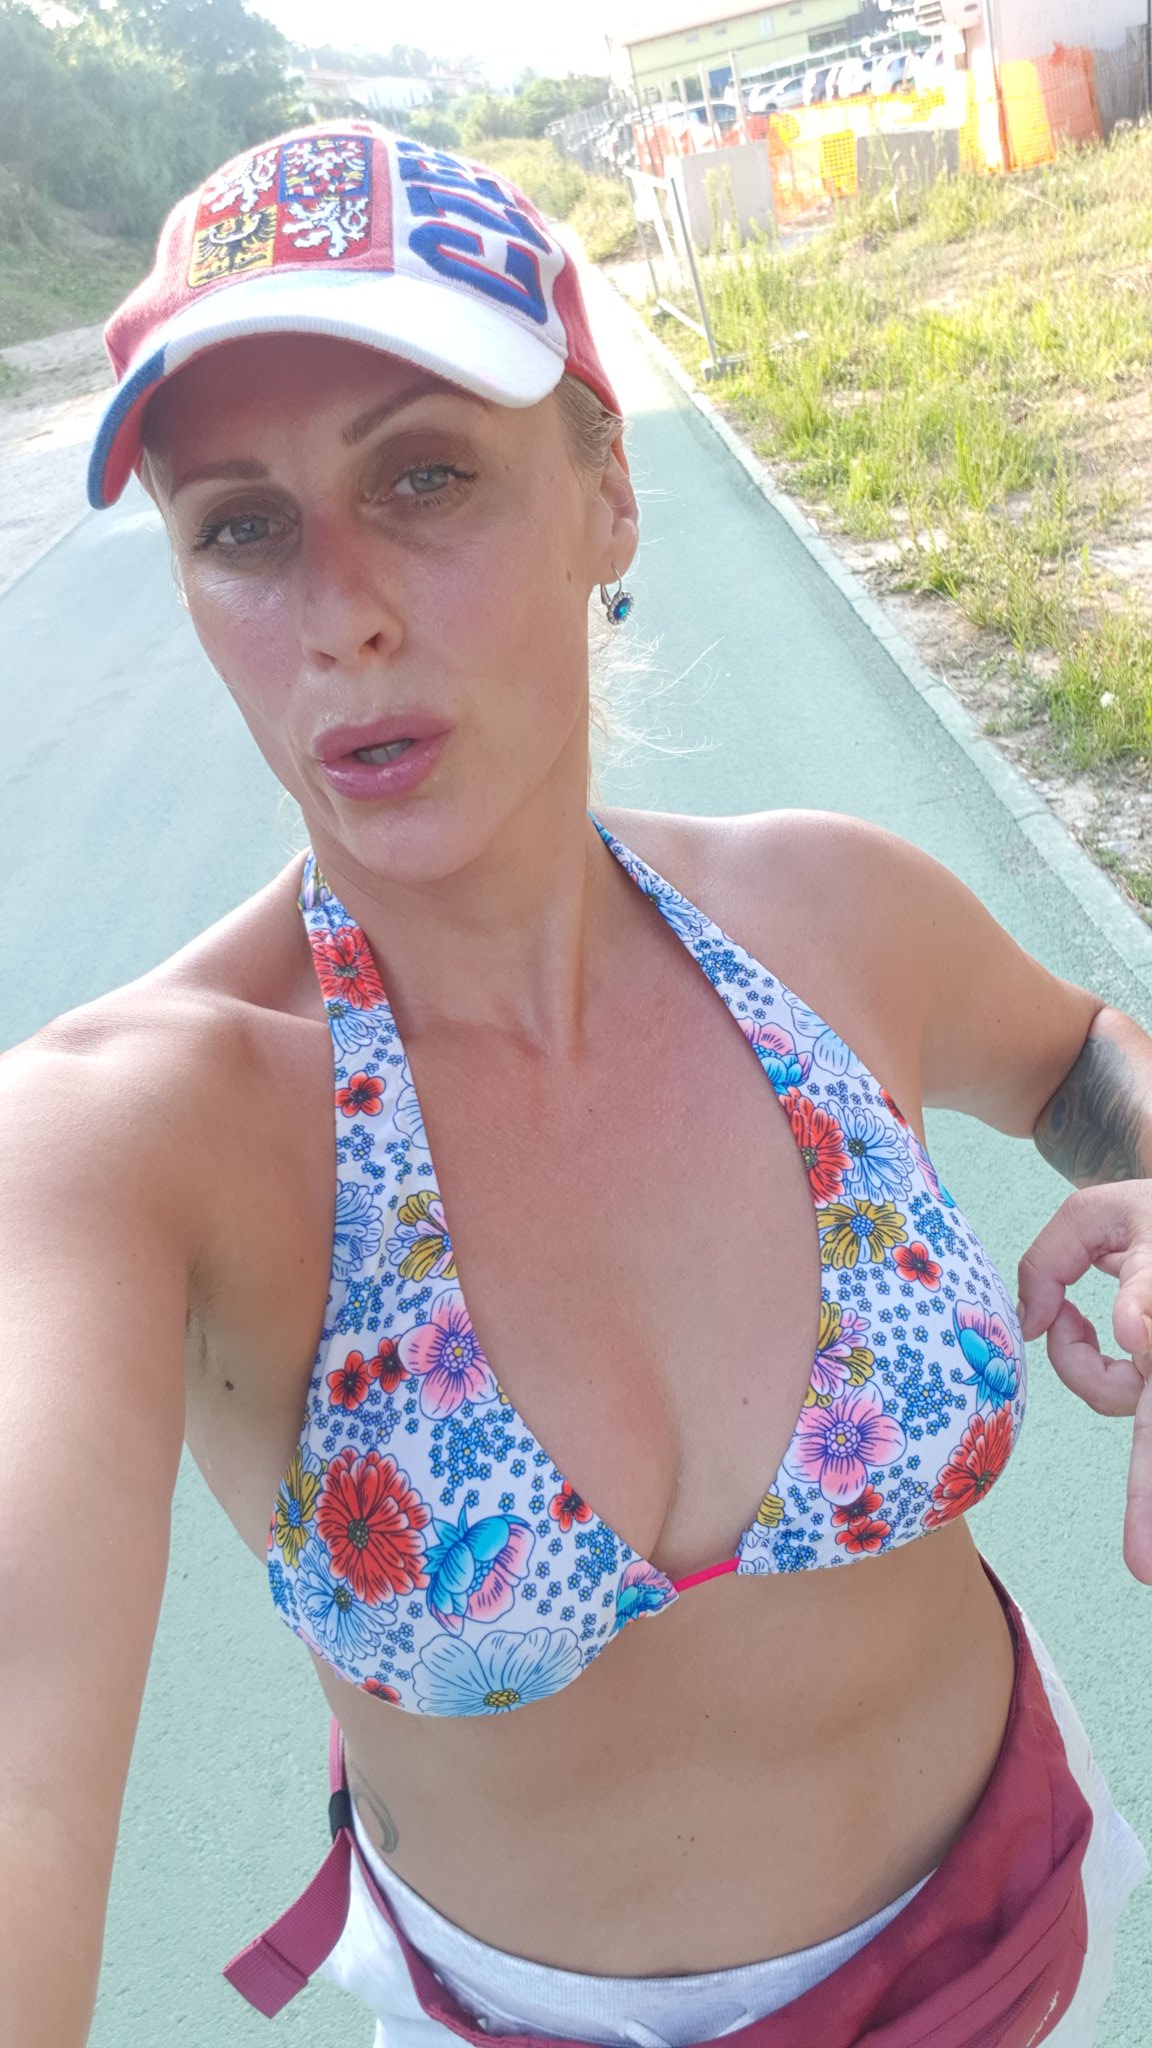 1 pic. Time for sport too...getting into shape.. ❤😈😈😈👌live Abruzzo Italy 🤩🤩🥰🥰🥰🥰🤗🤗🤗 https://t.co/Qta0